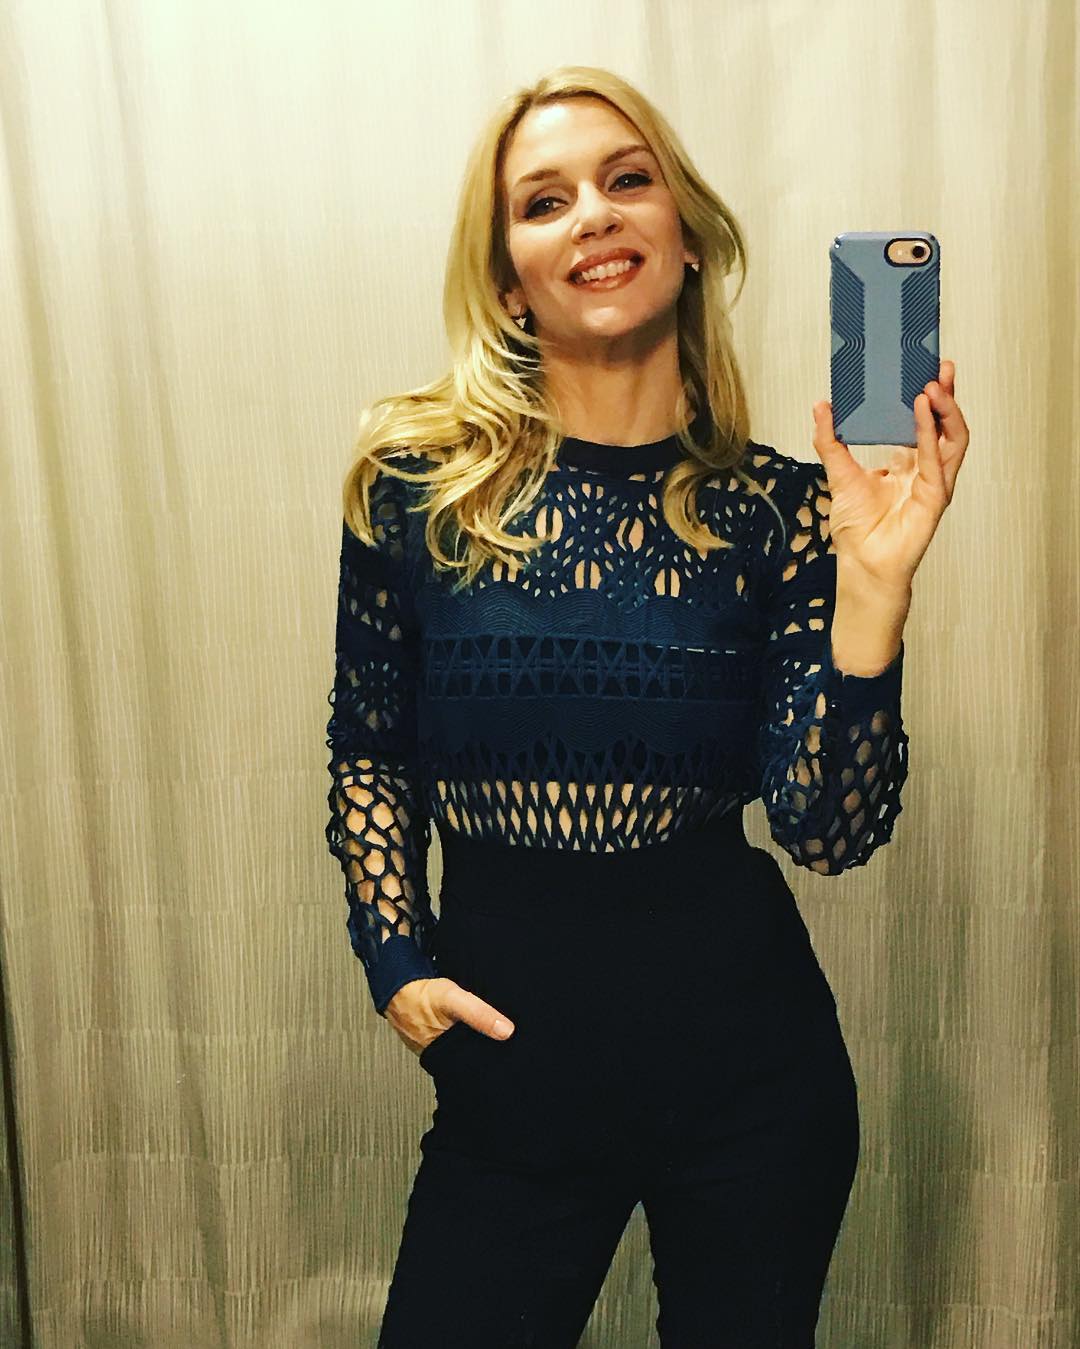 60+ Hot Pictures Of Rhea Seehorn Are Just Too Damn Sexy | Best Of Comic Books